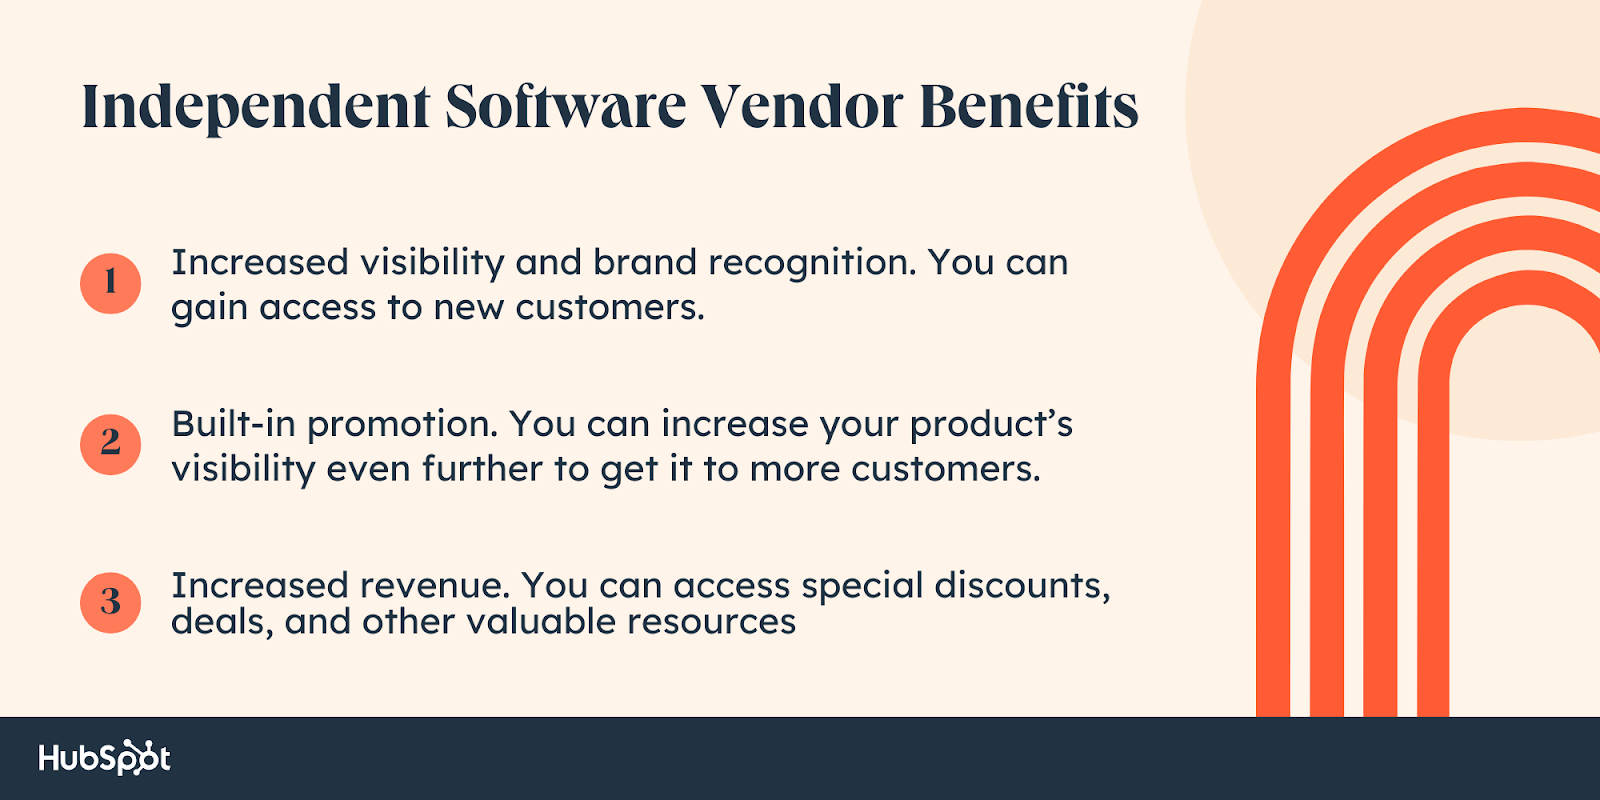 Independent software vendor benefits.  Increased visibility and brand recognition.  You can get access to new customers.  built-in promotion.  You can further increase the visibility of your product to reach more customers.  increase in income.  You can access exclusive discounts, deals and other valuable resources.